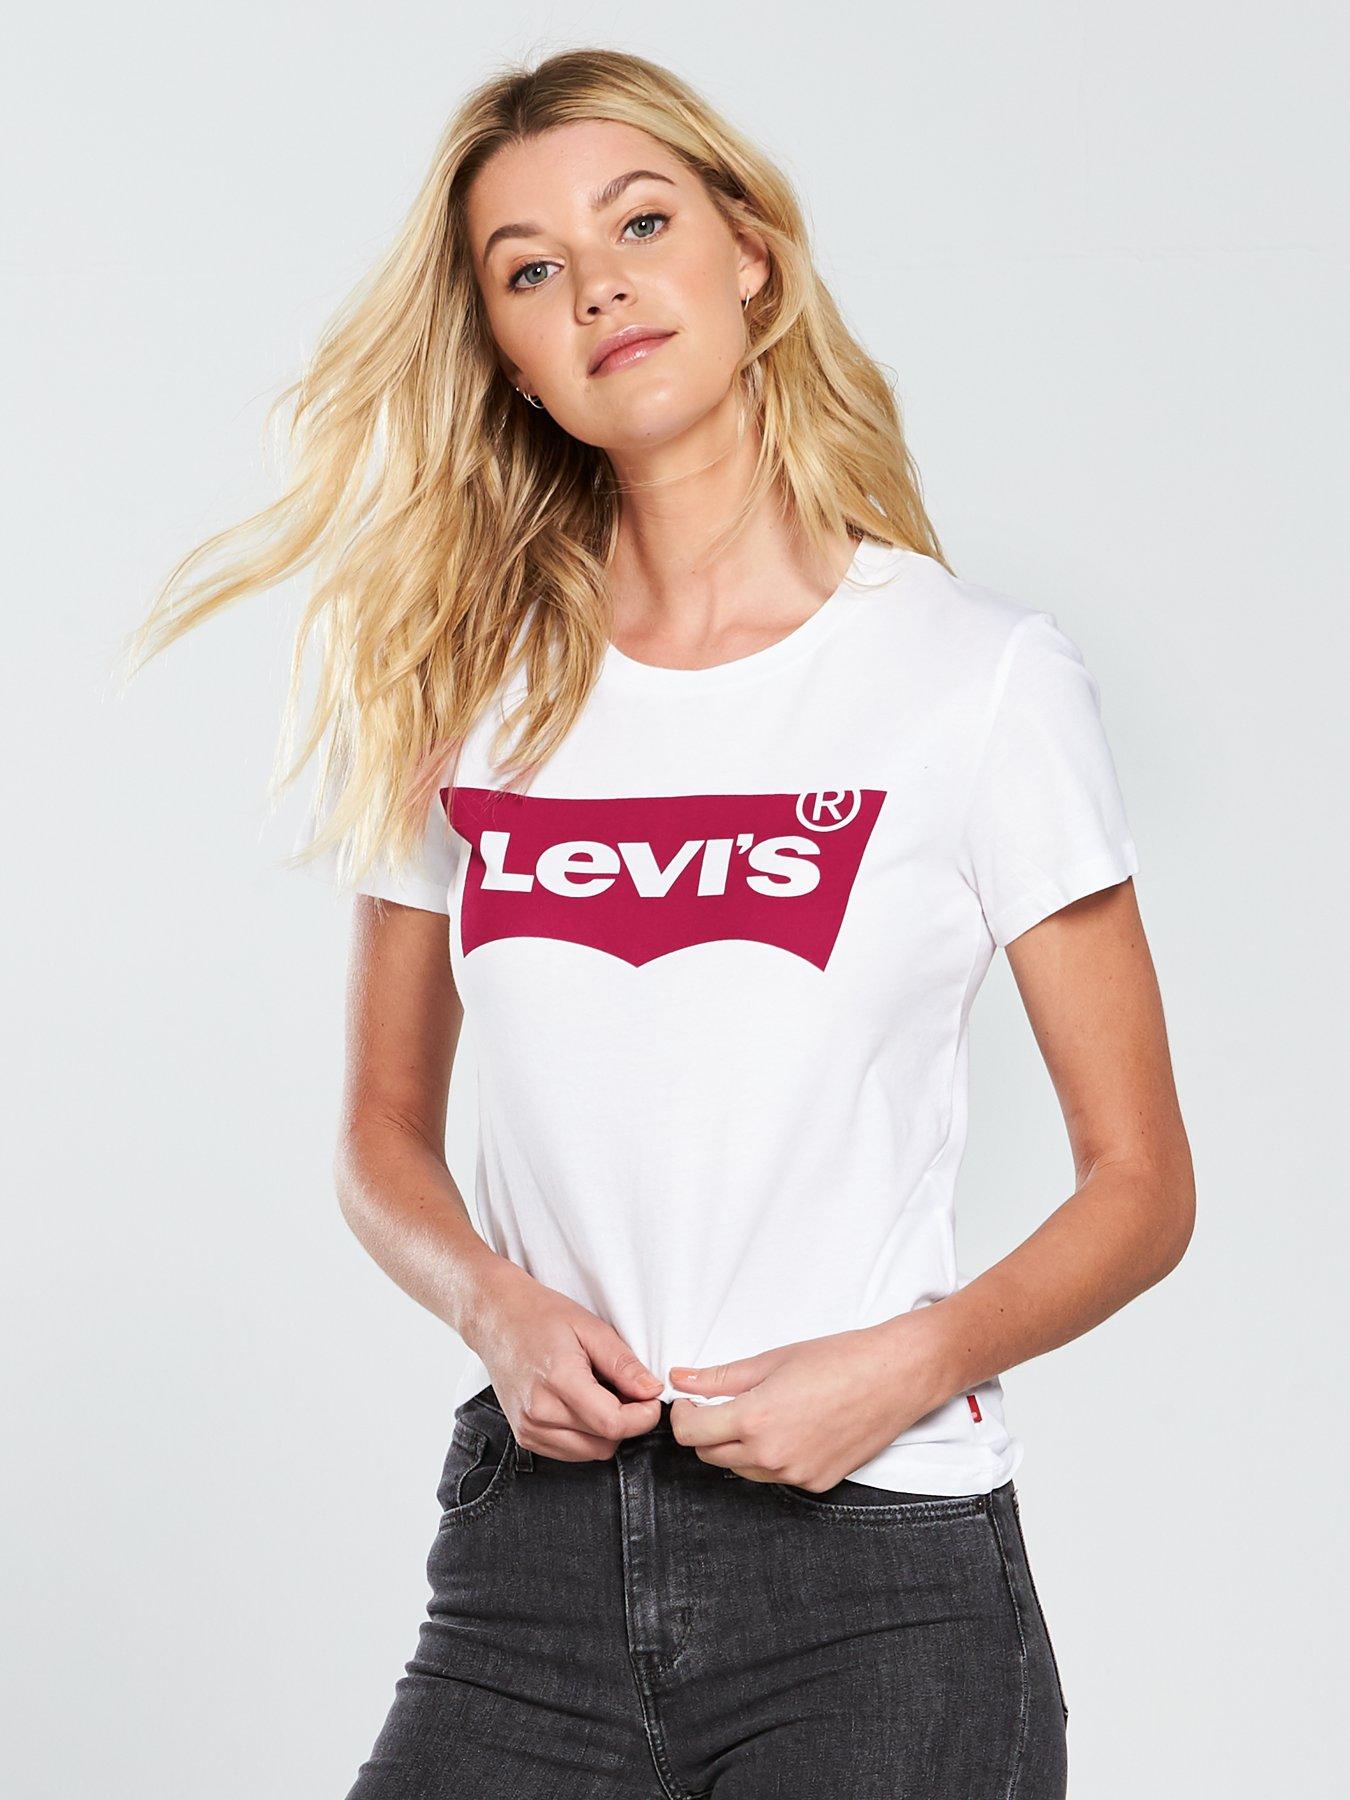 levis top womens white